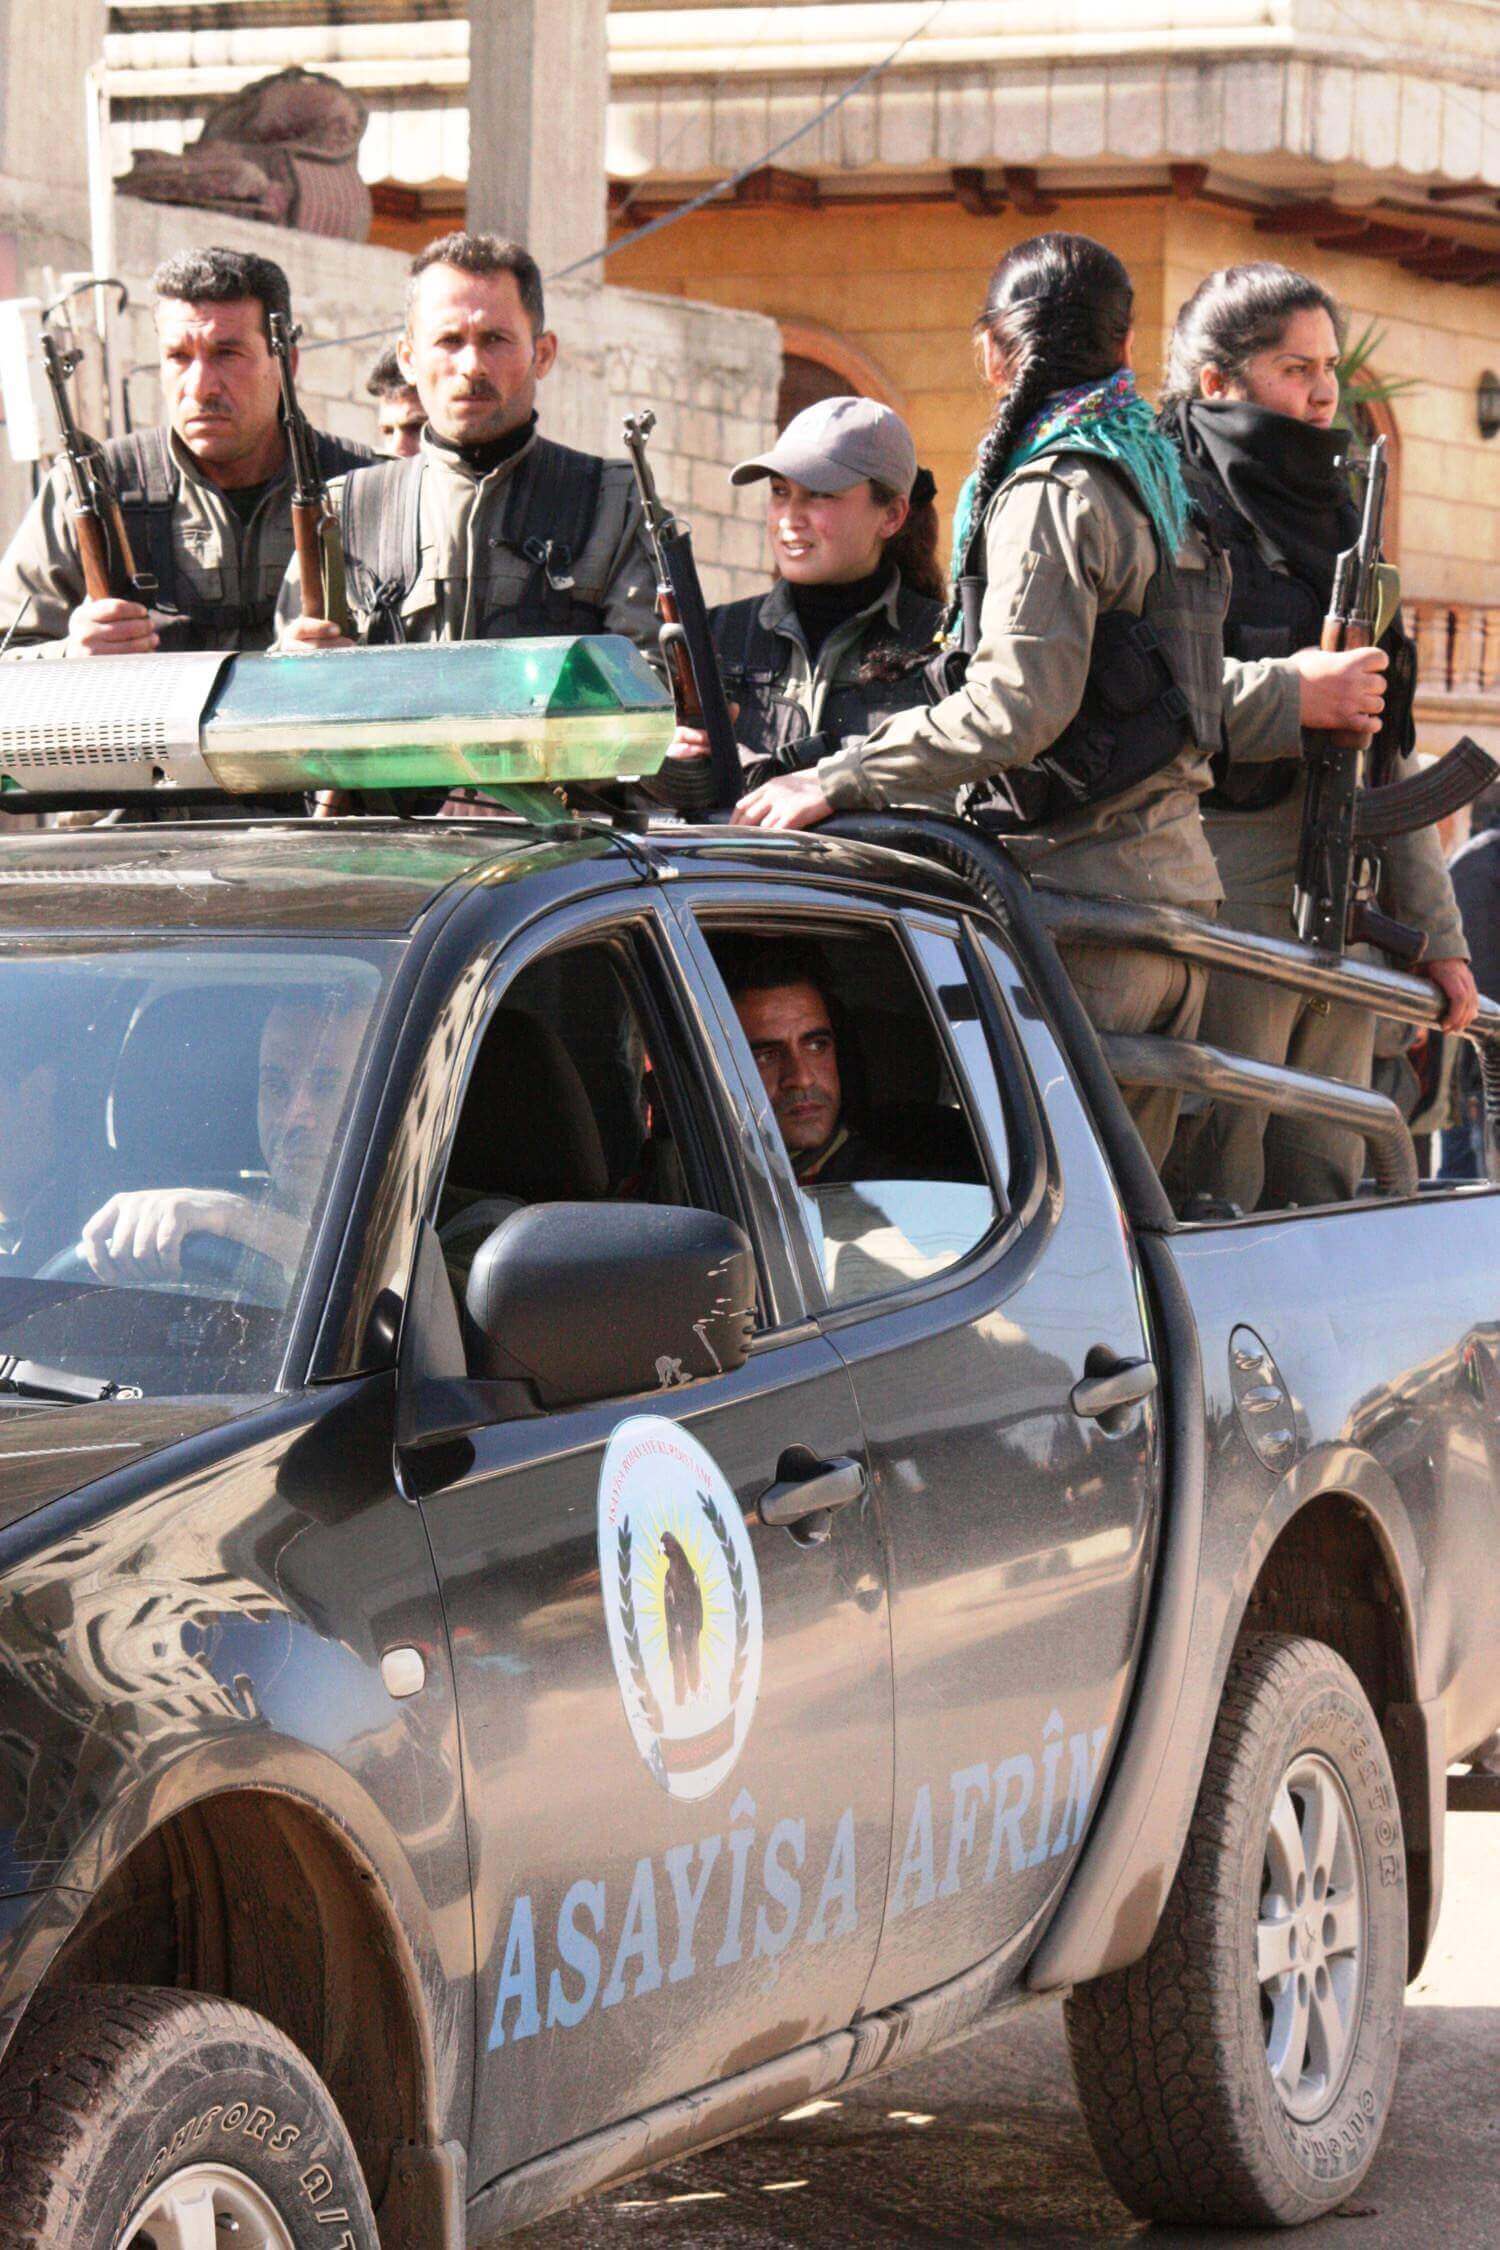 Police in the city of Efrîn February 3, 2015